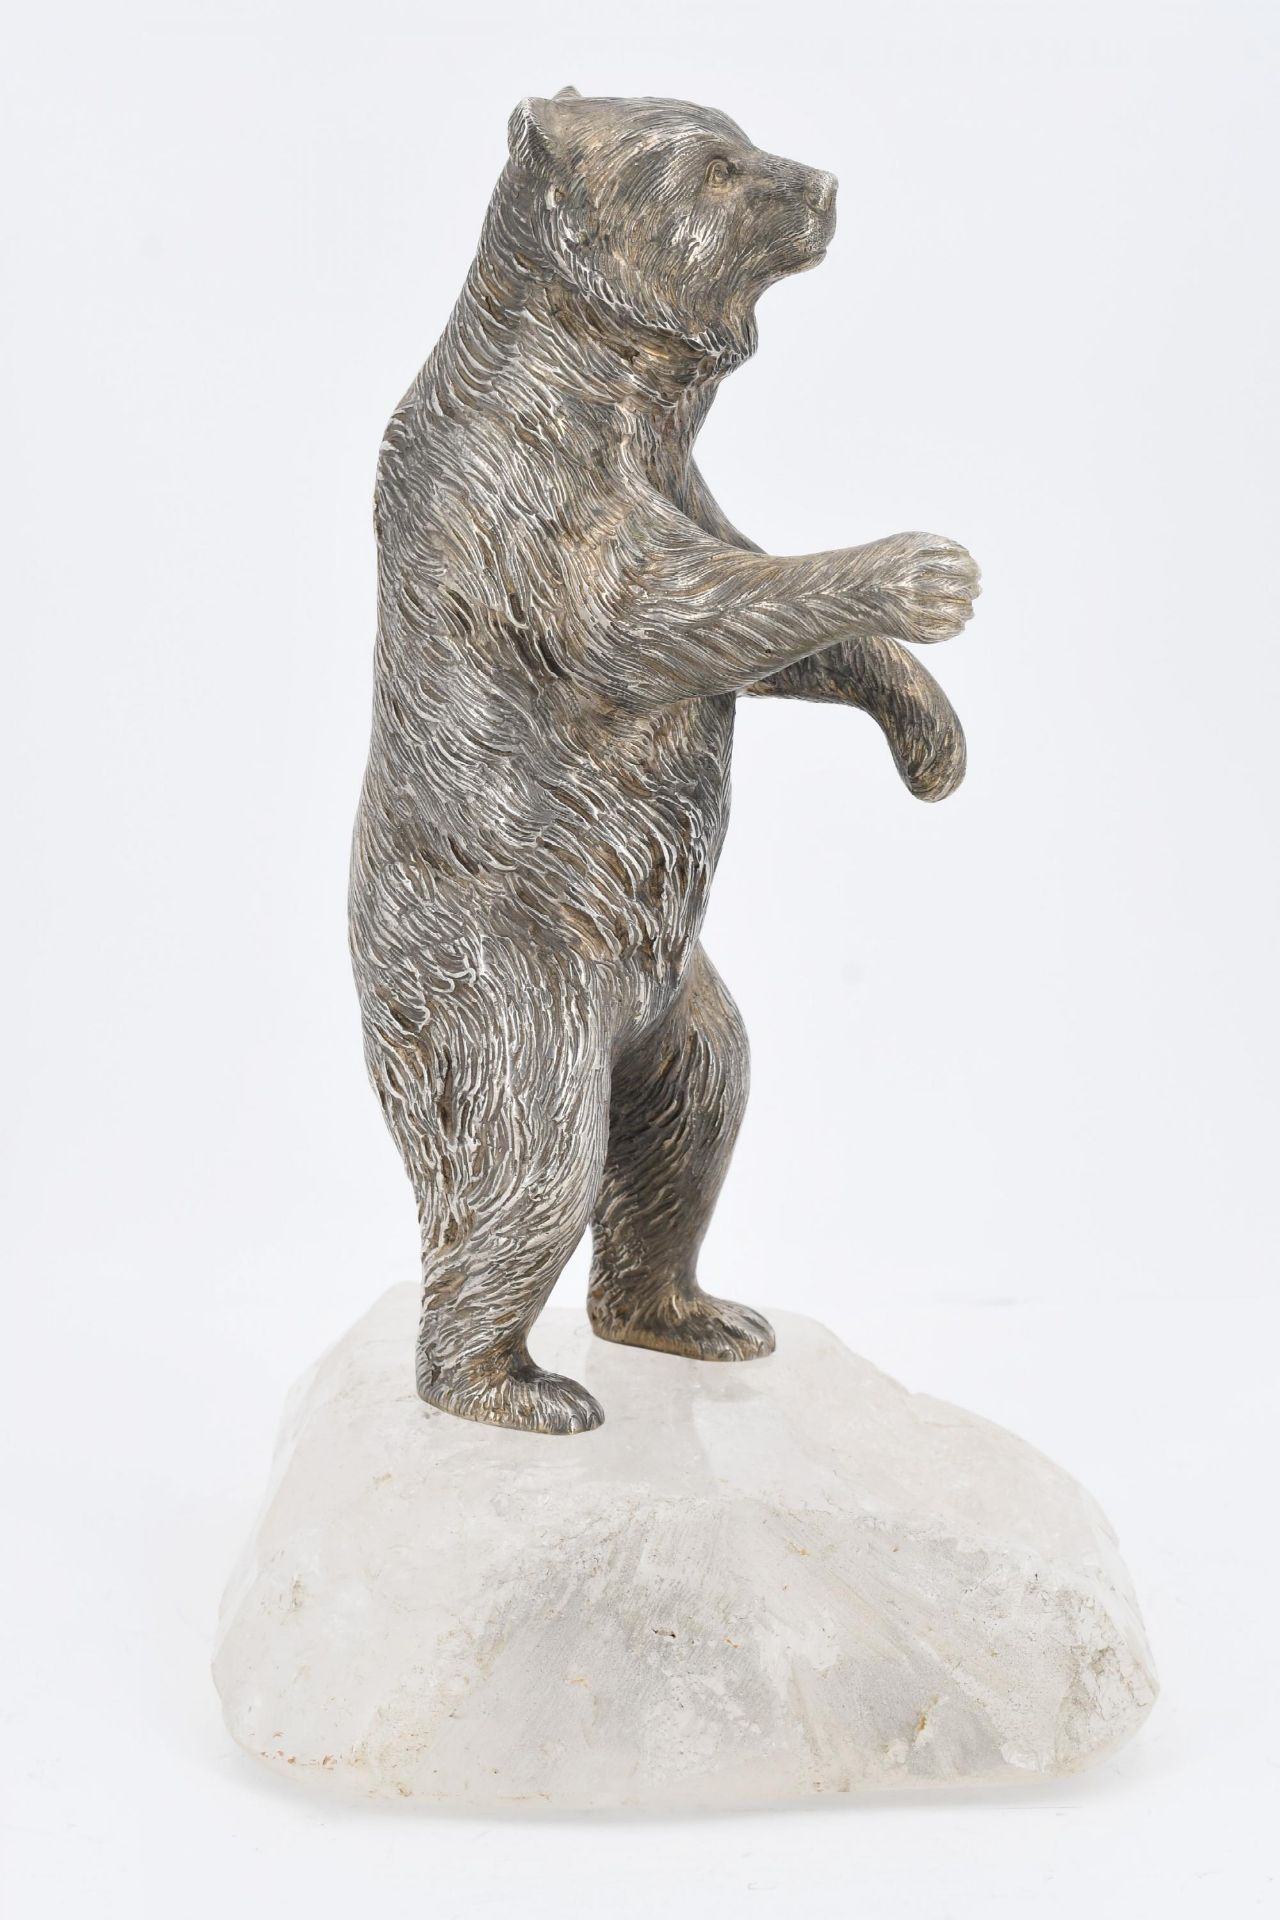 Silver figurine of a standing bear mounted on mountain crystal - Image 5 of 6